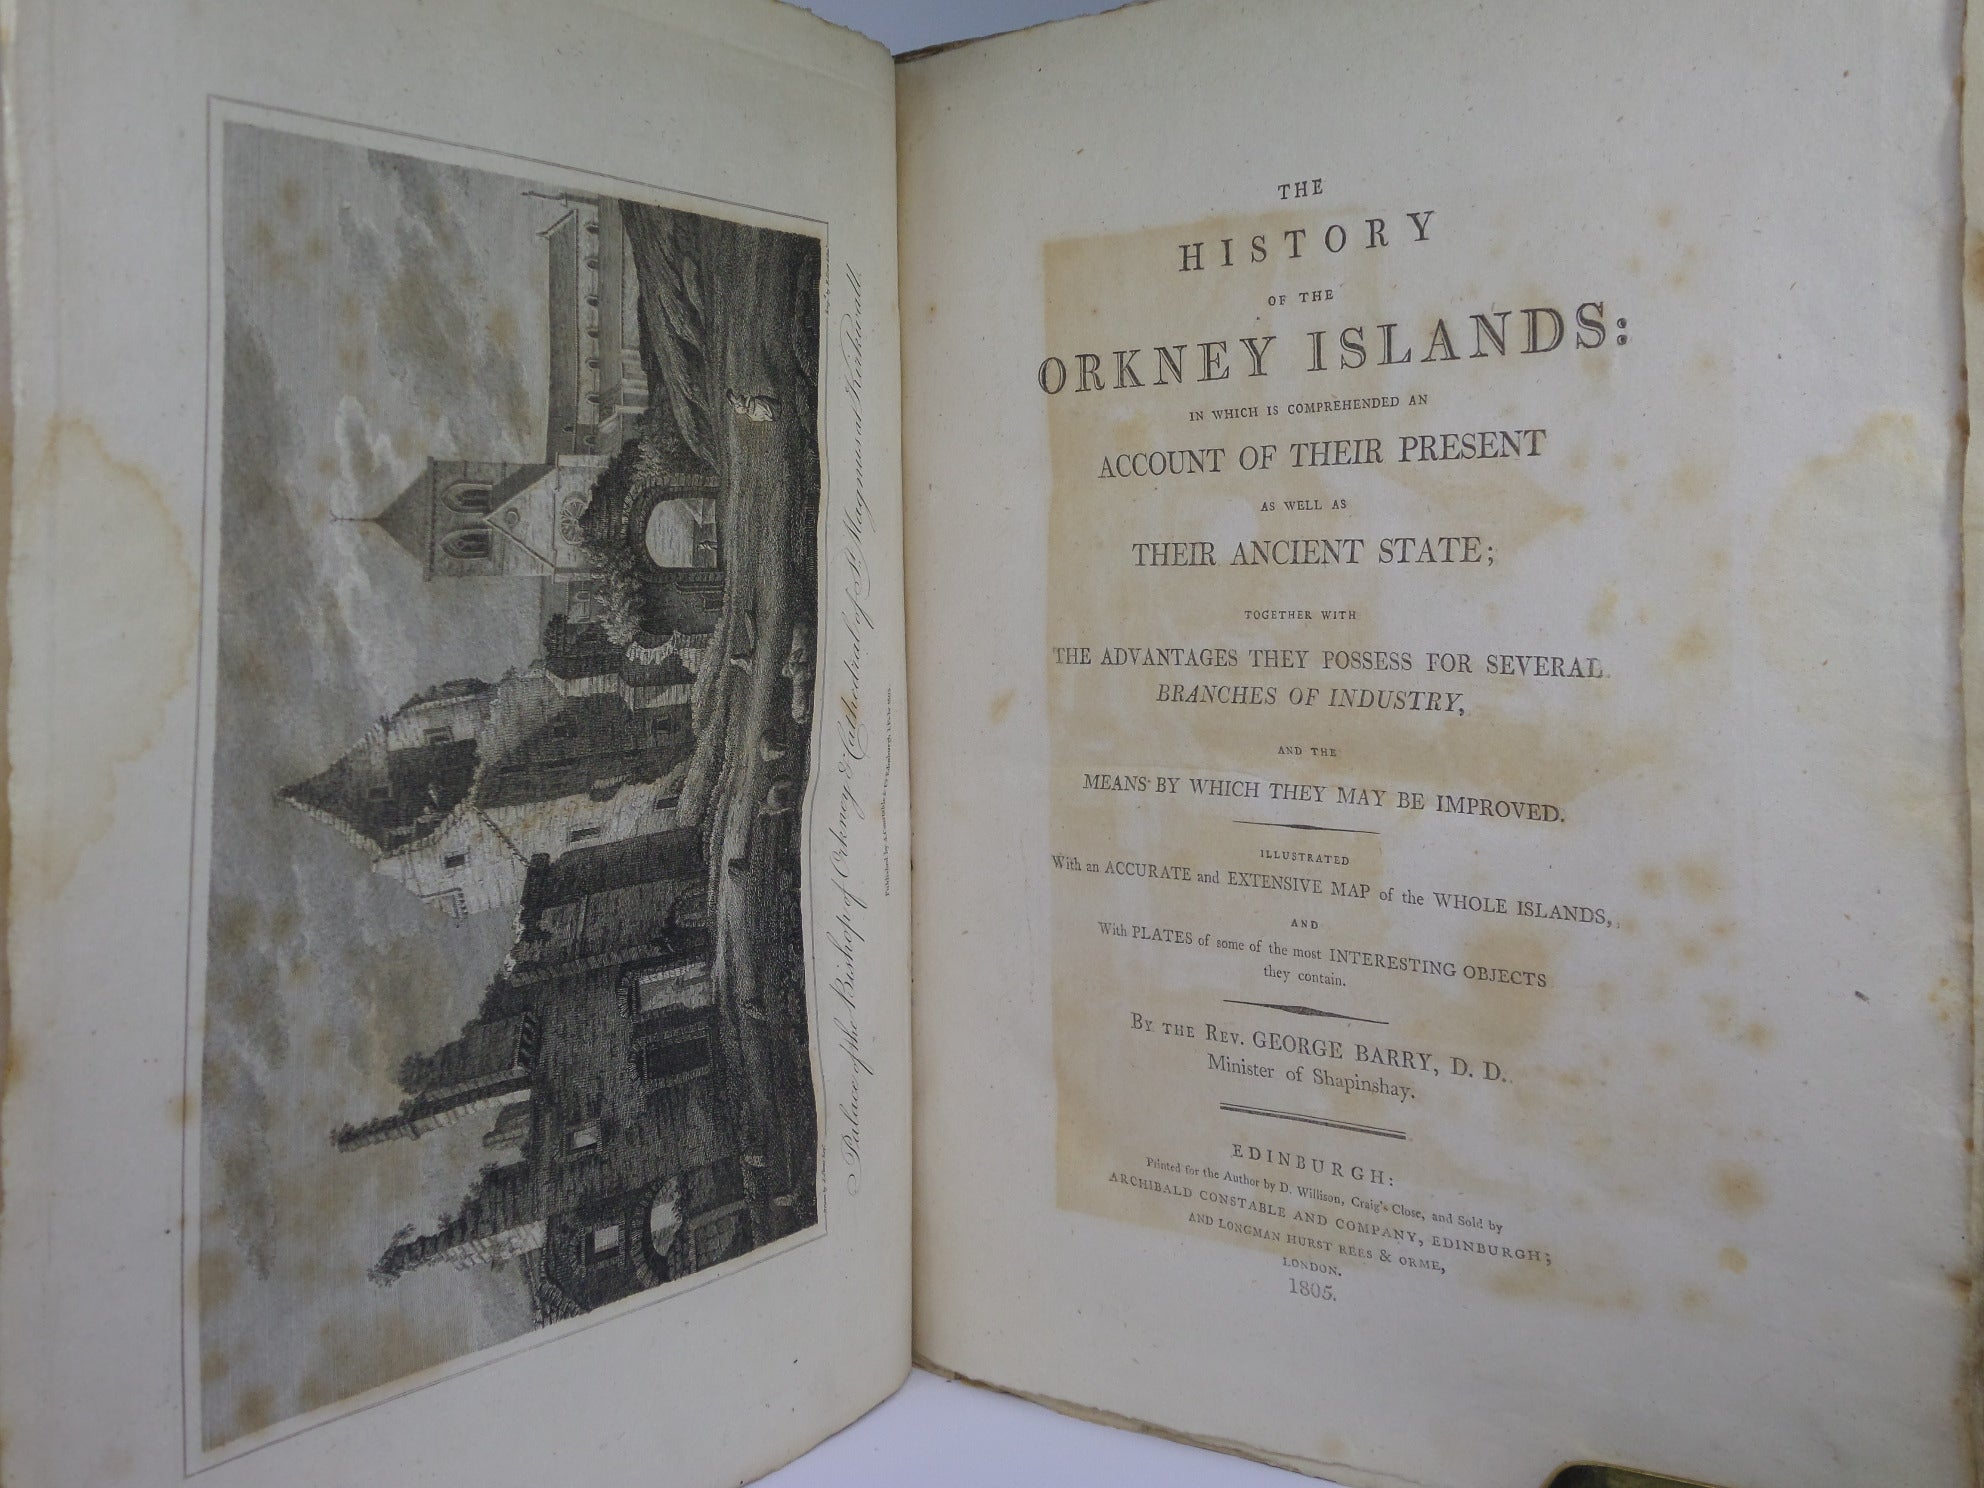 THE HISTORY OF THE ORKNEY ISLANDS BY GEORGE BARRY 1805 FIRST EDITION